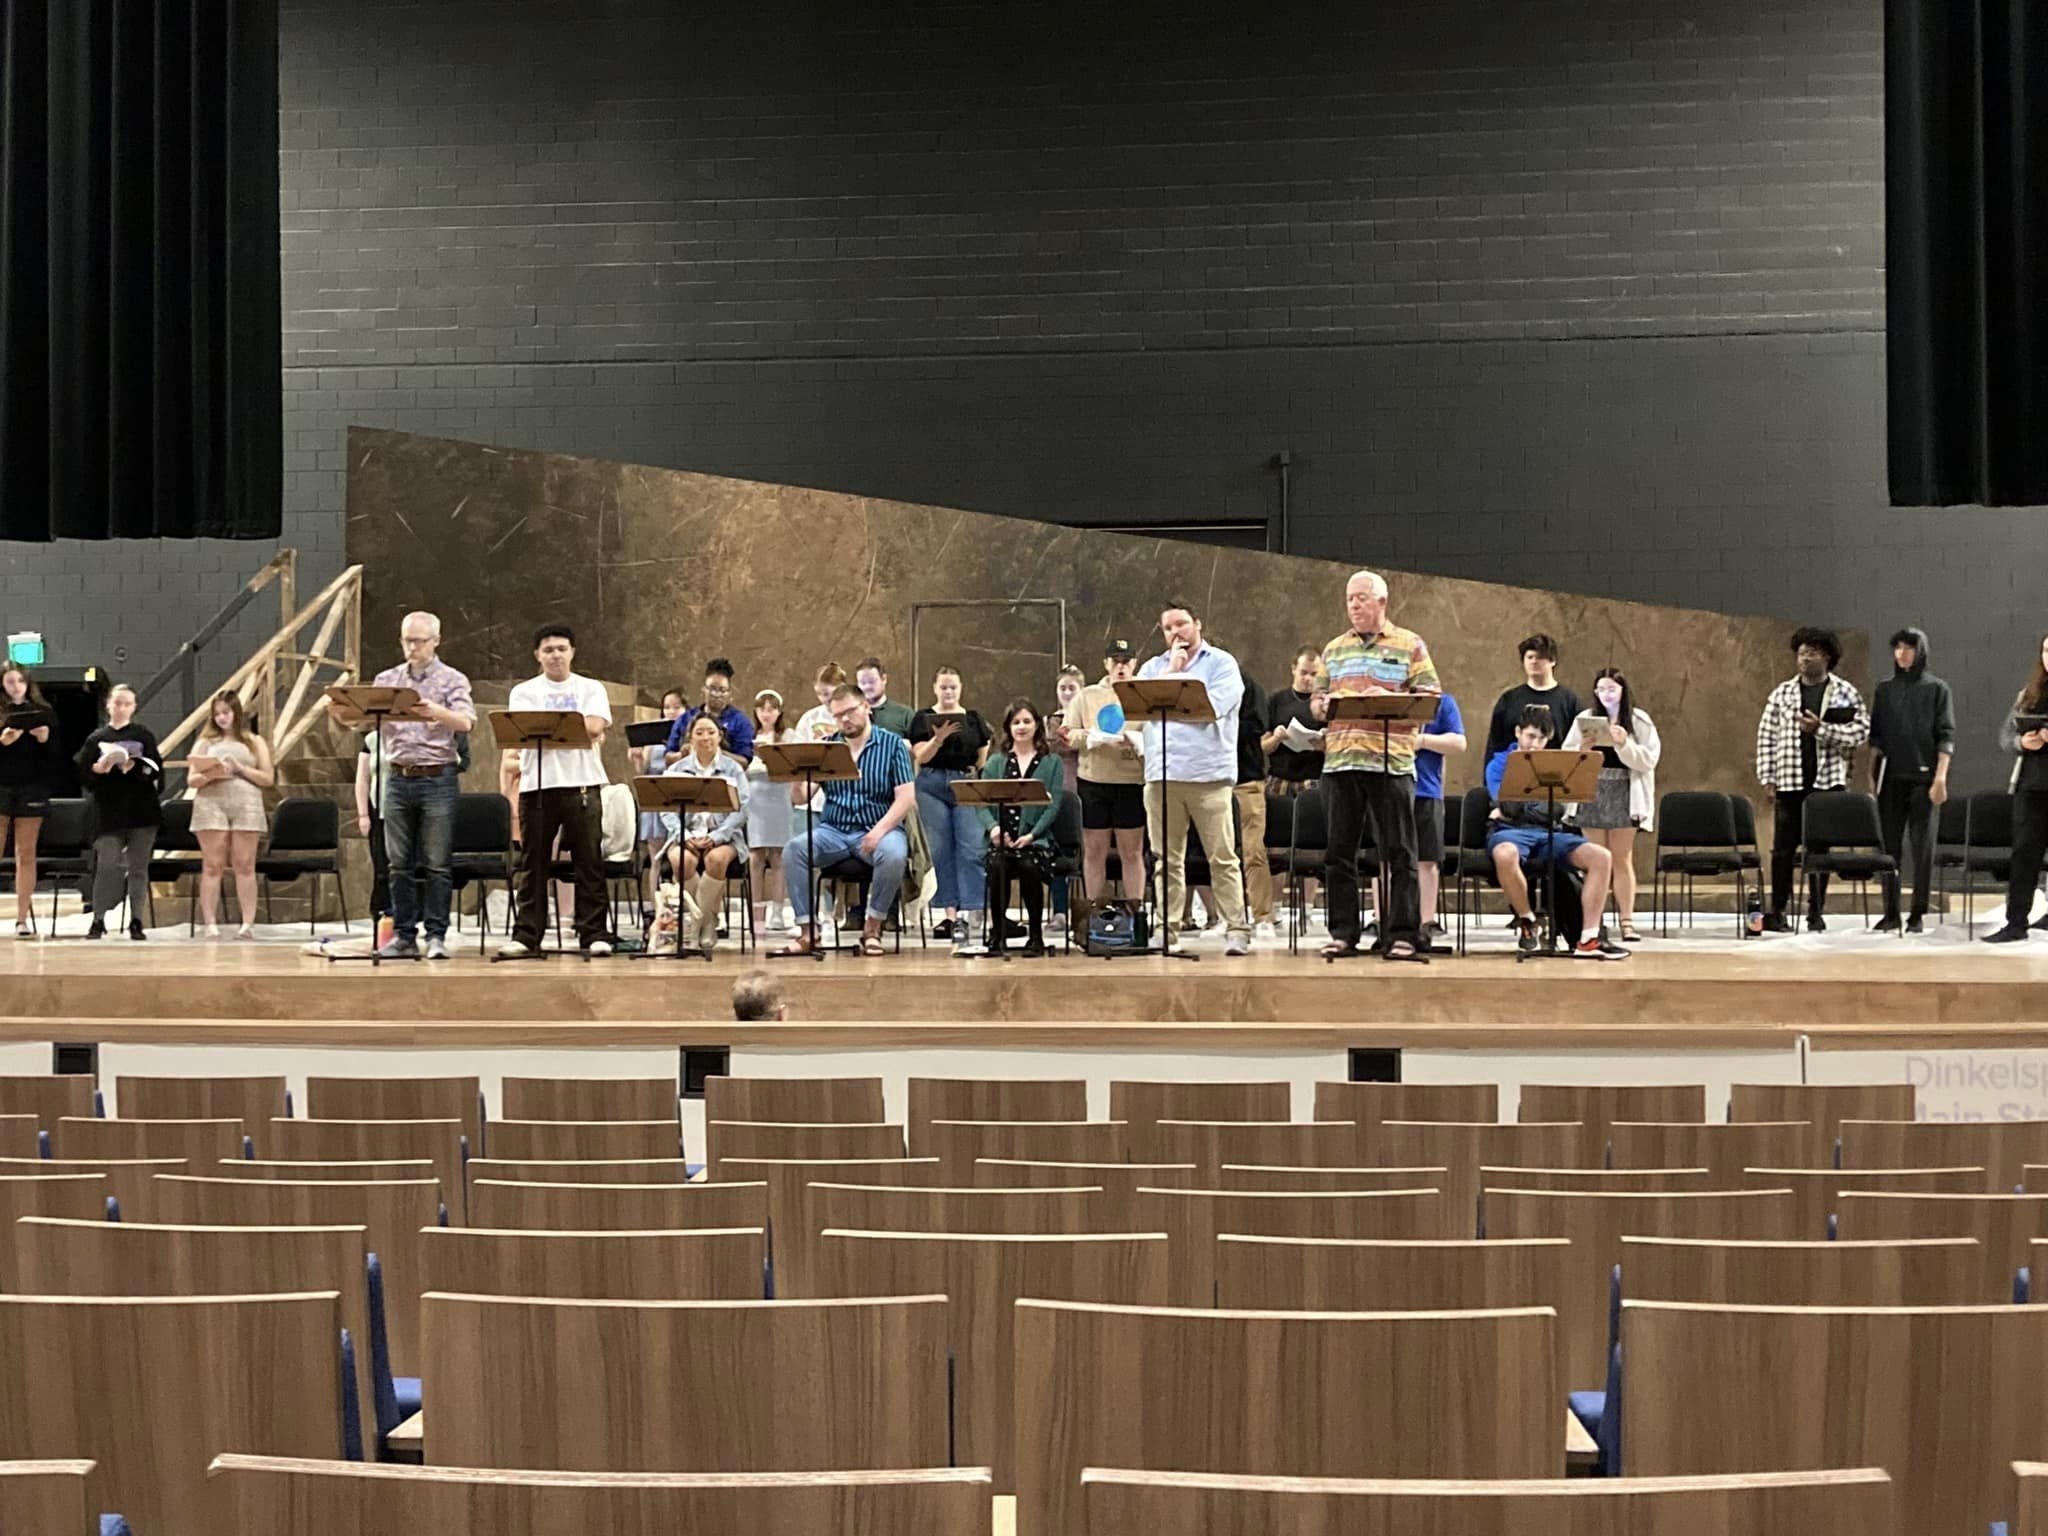 La Bohème - first sitzprobe in our new hall in the SFPAC